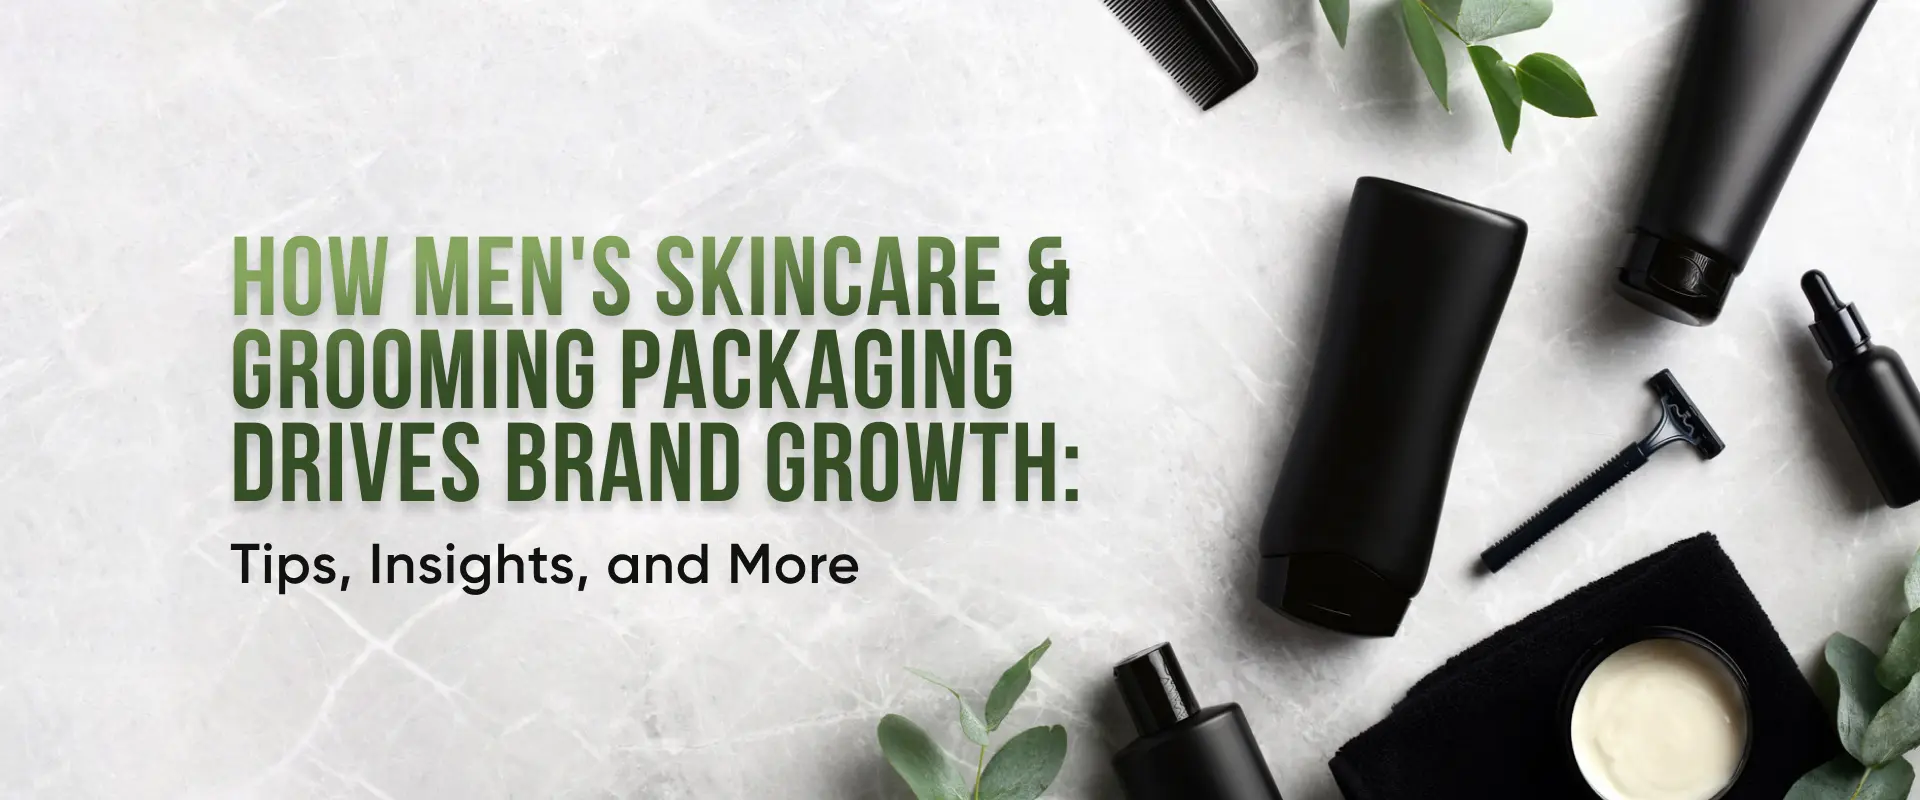 How men’s skincare & grooming packaging drives brand growth: tips, insights, and more